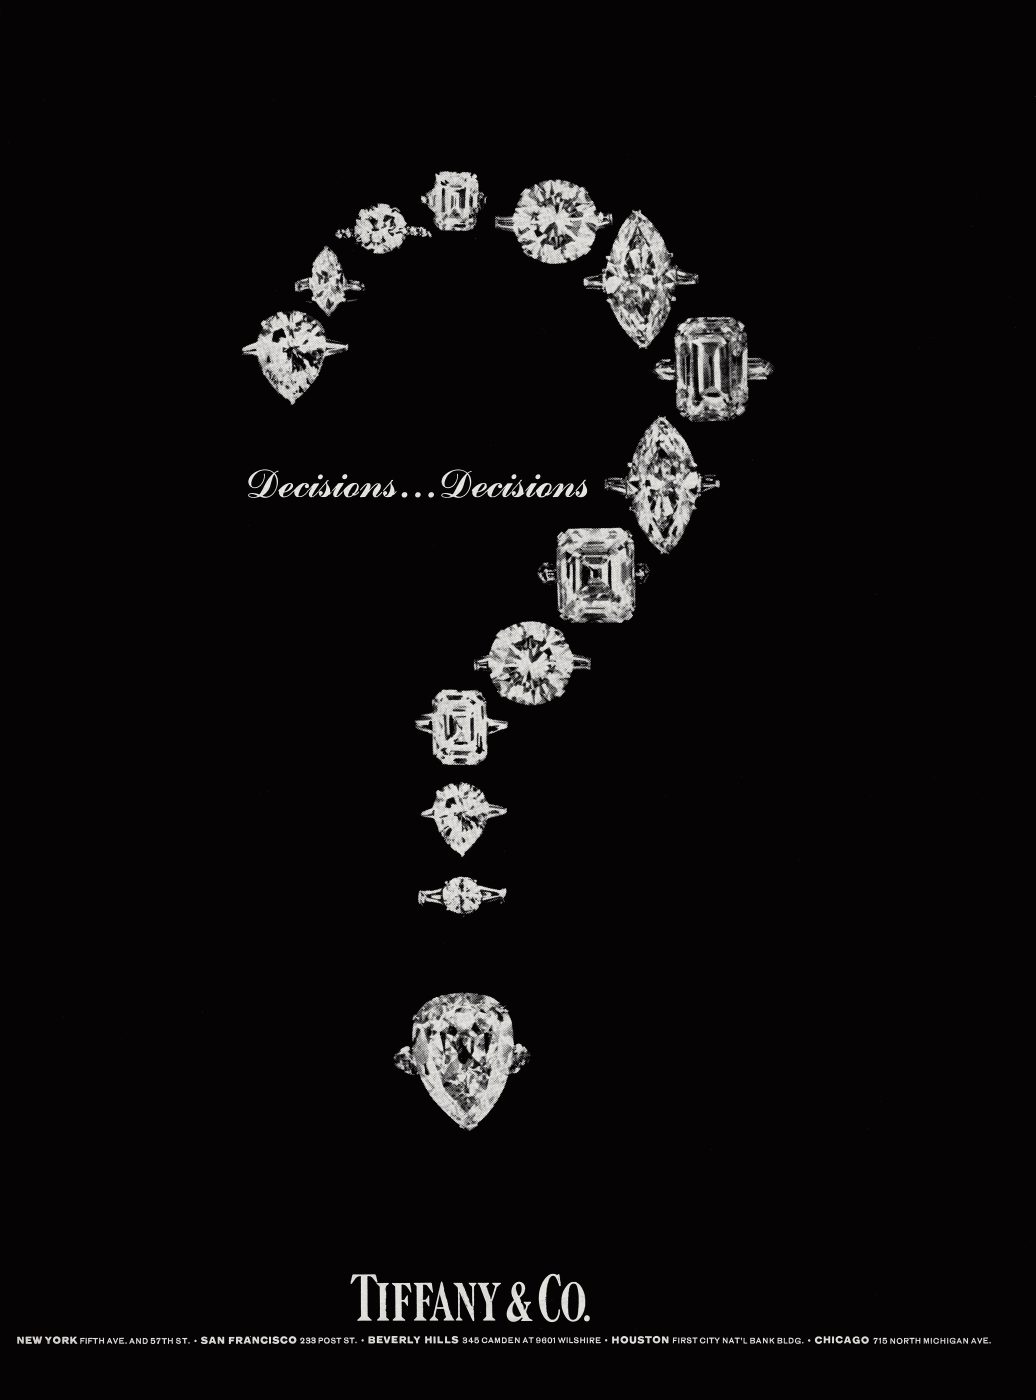 Tiffany & Co. advertisement for engagement rings, 1967.
© Tiffany & Co. Archives 2021